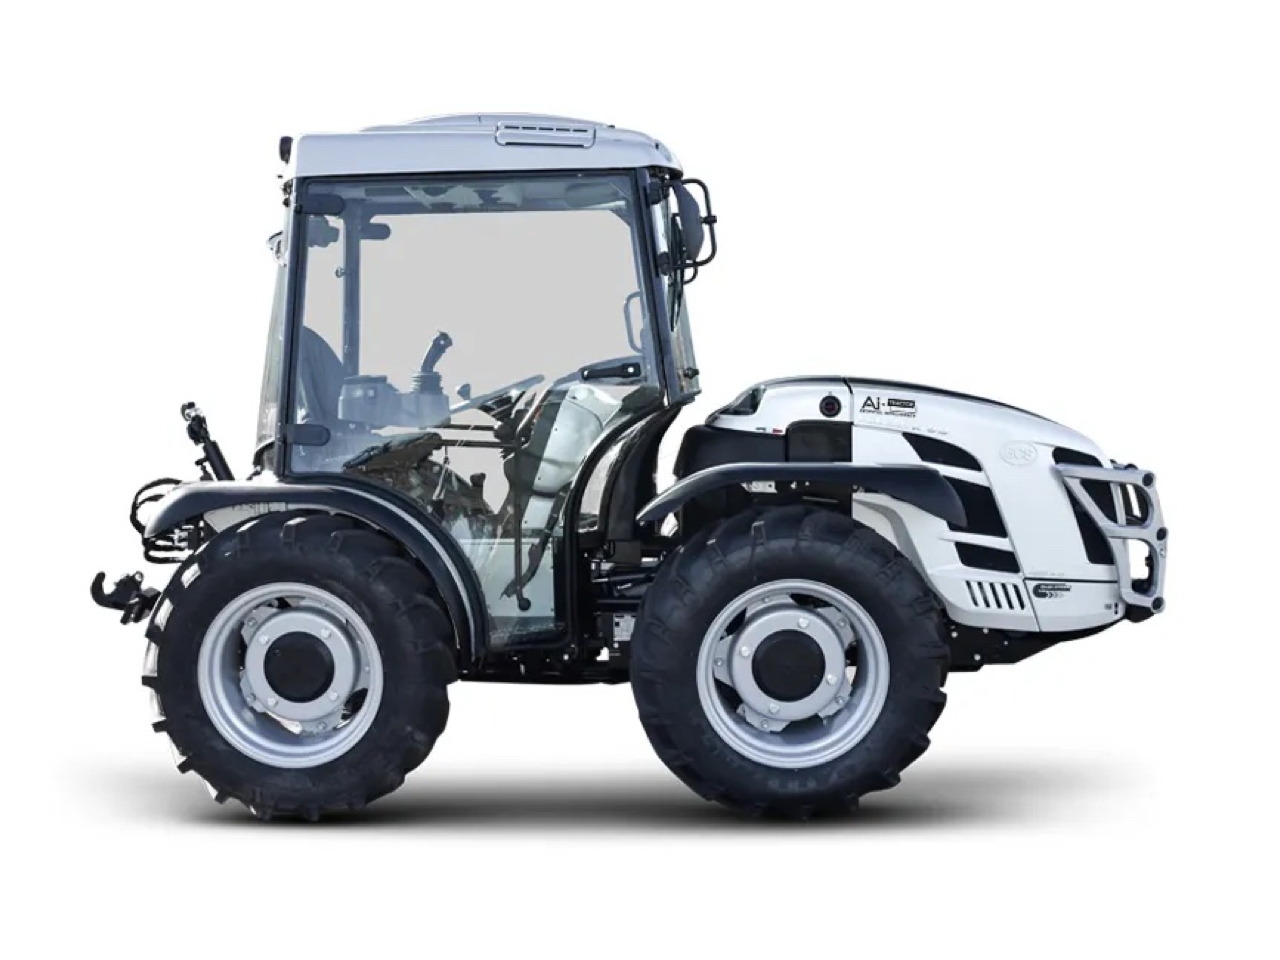 Bcs Volcan K90 AI-Tractor Volcan K90 RS AI-Tractor